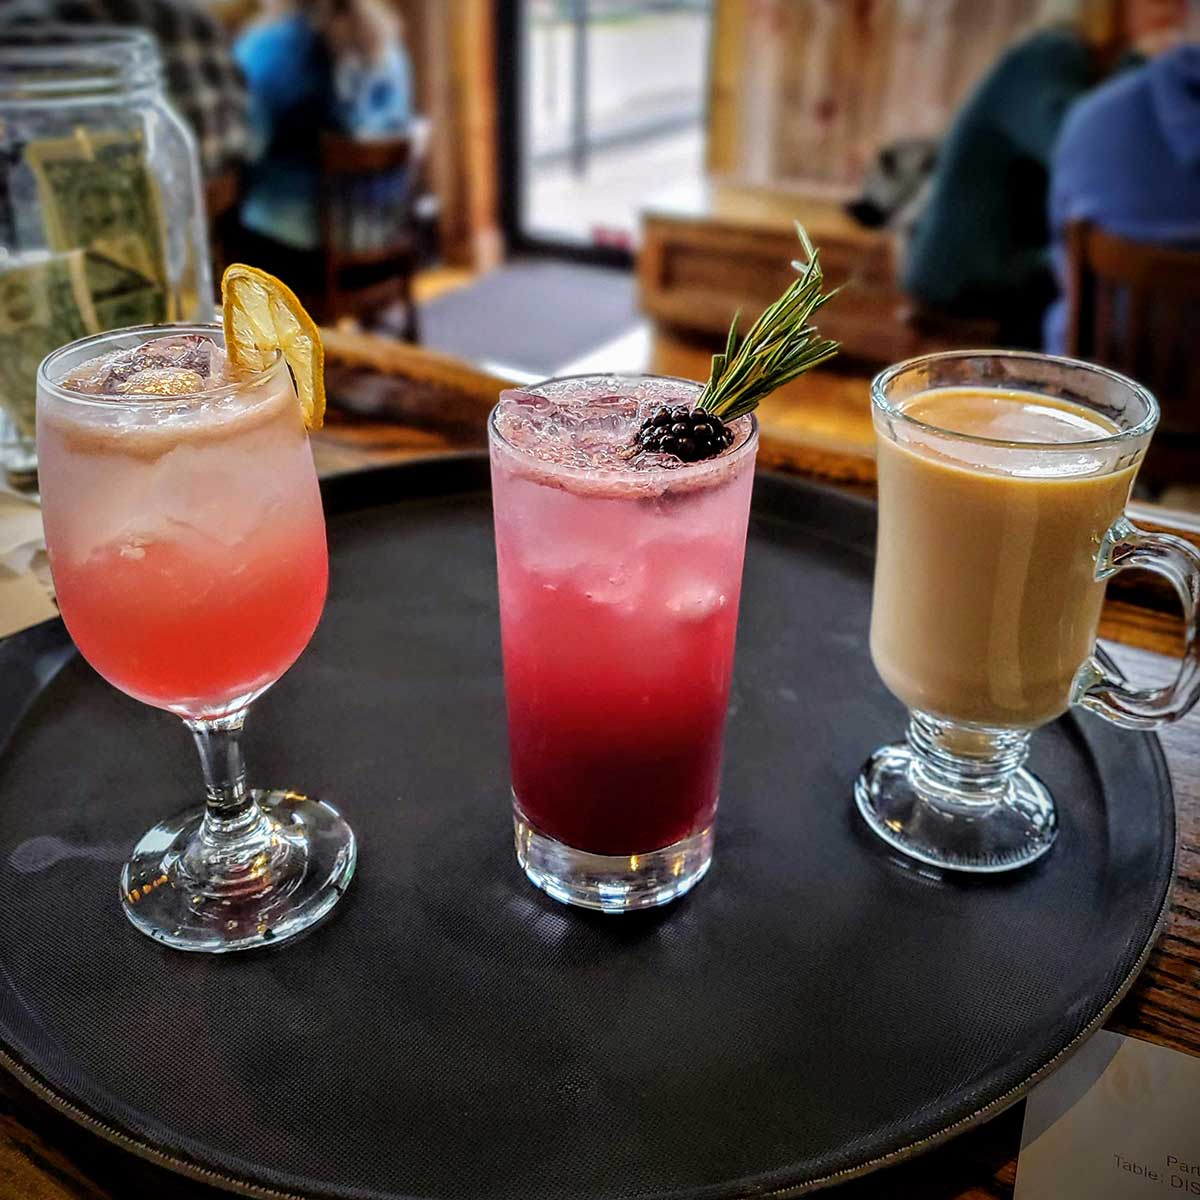 Delicious drinks on a tray